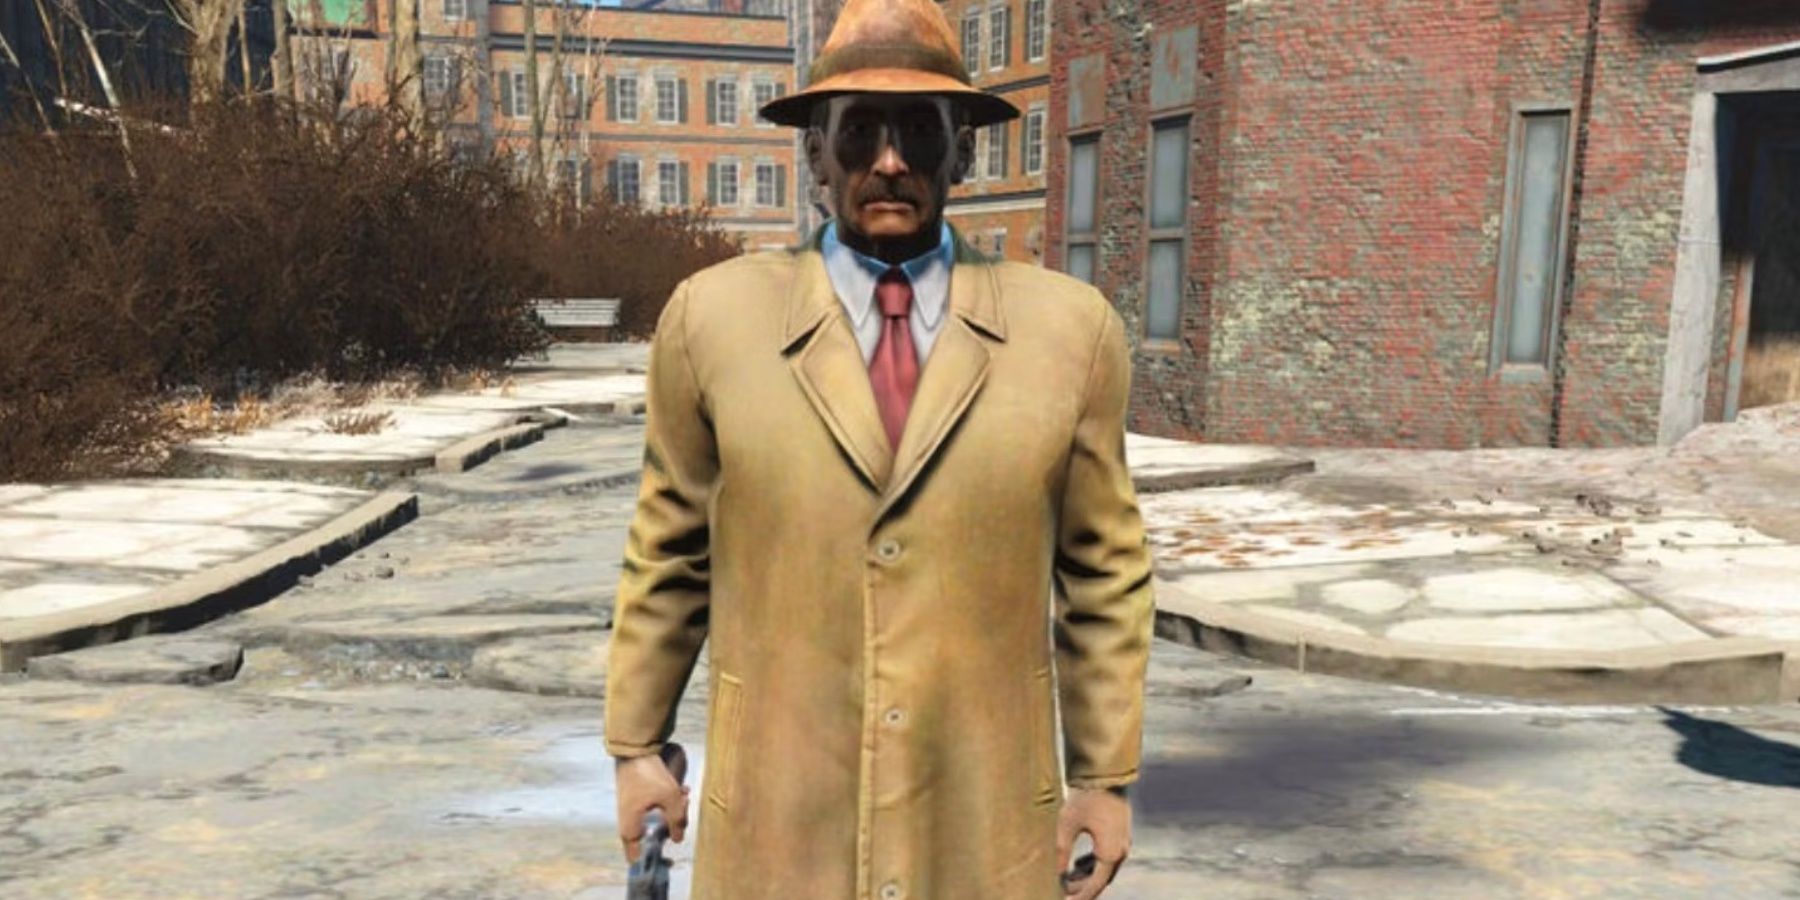 Fallout Random Encounters Mysterious Stranger stands ready with his revolver in Fallout 4.